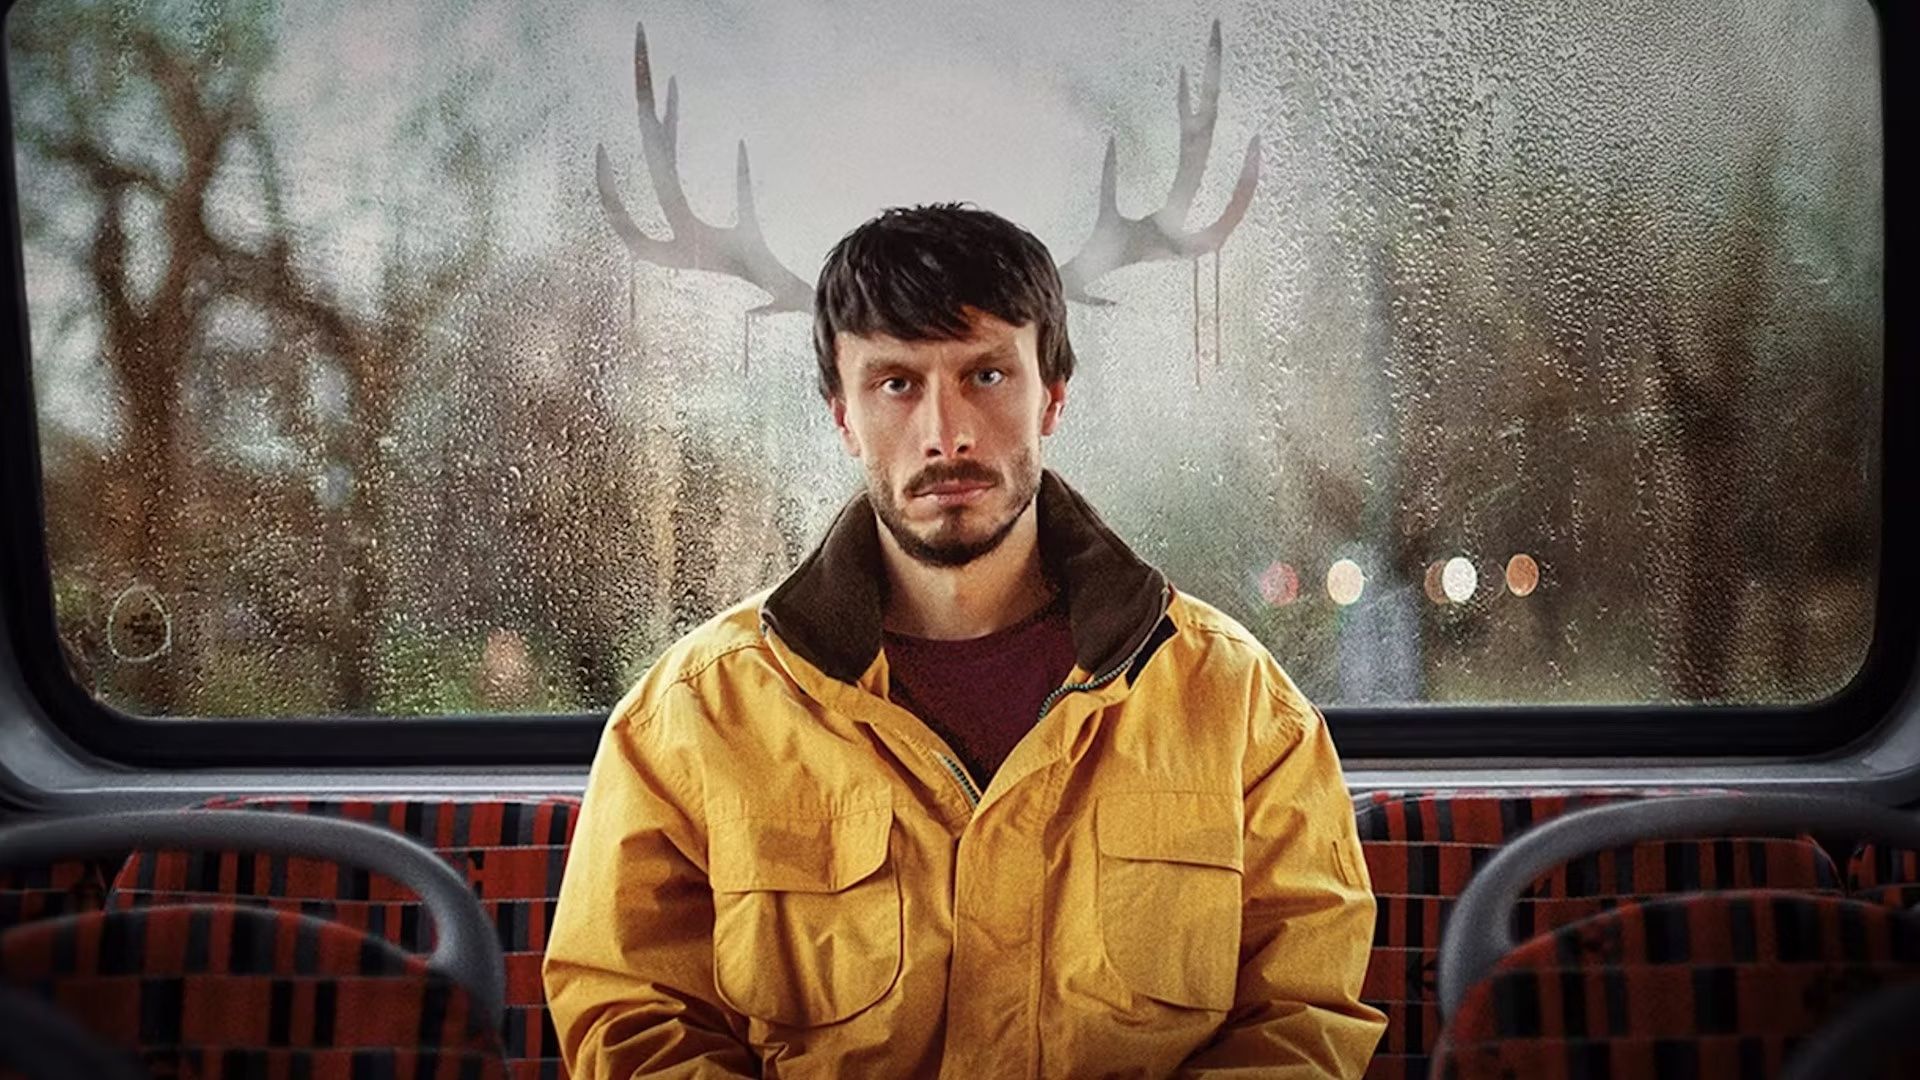 Donny sitting at the back of a bus with a yellow jacket, outline of reindeer ears on either side of him in the window in a scene from Baby Reindeer.